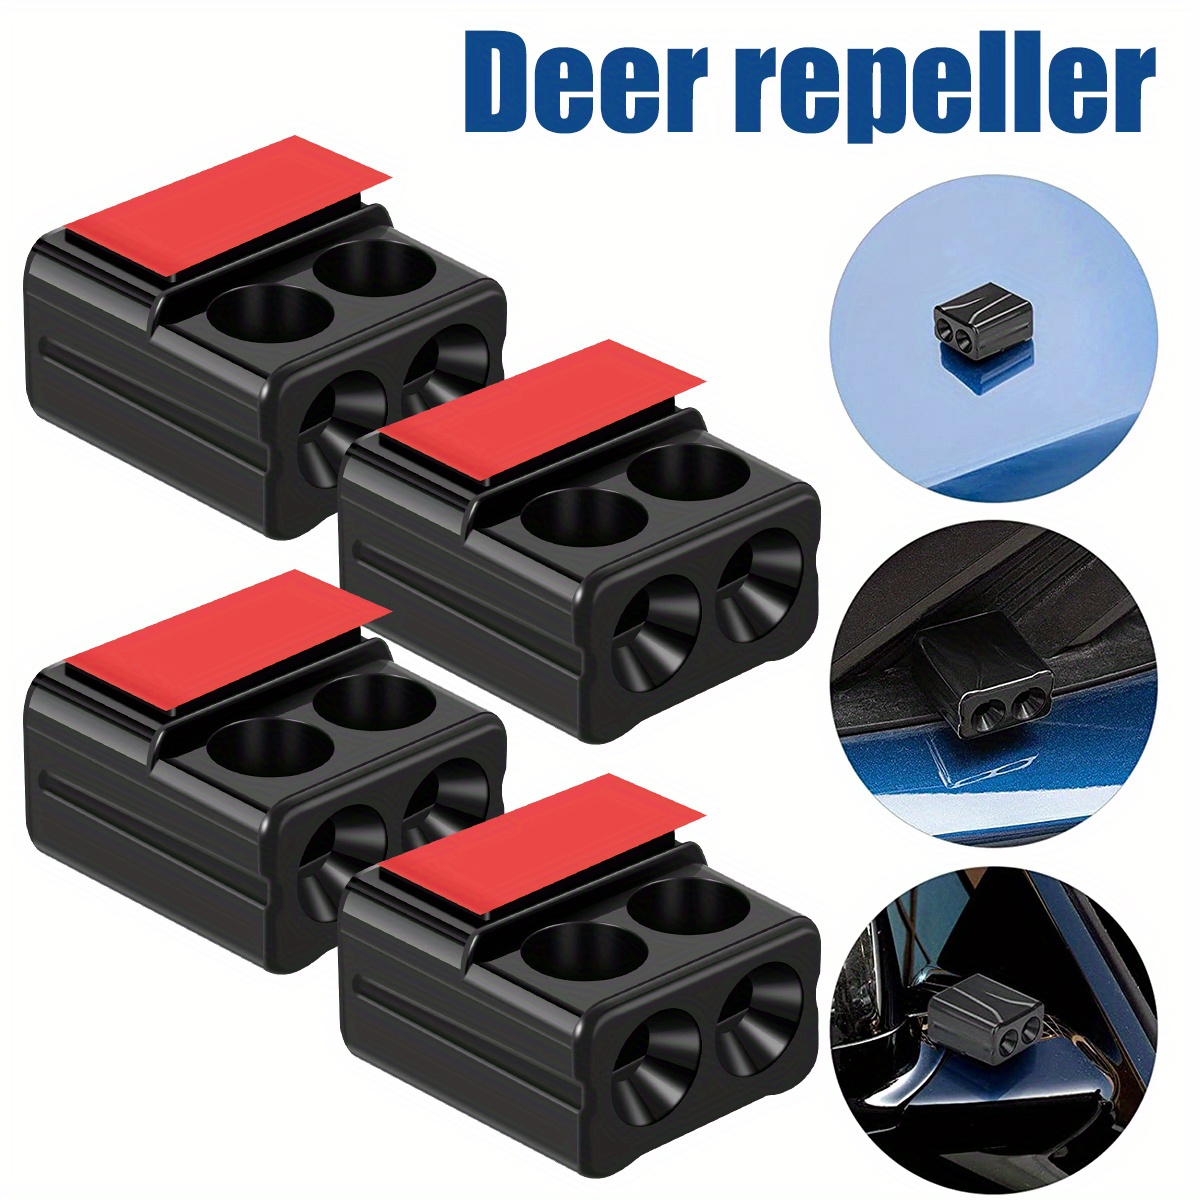 4pcs Deer Warning And Repelling Whistles, Physical Ultrasonic Mini  Waterproof Deer Whistle, Animal Alert Device, Avoids Collisions For Car  Motorcycle